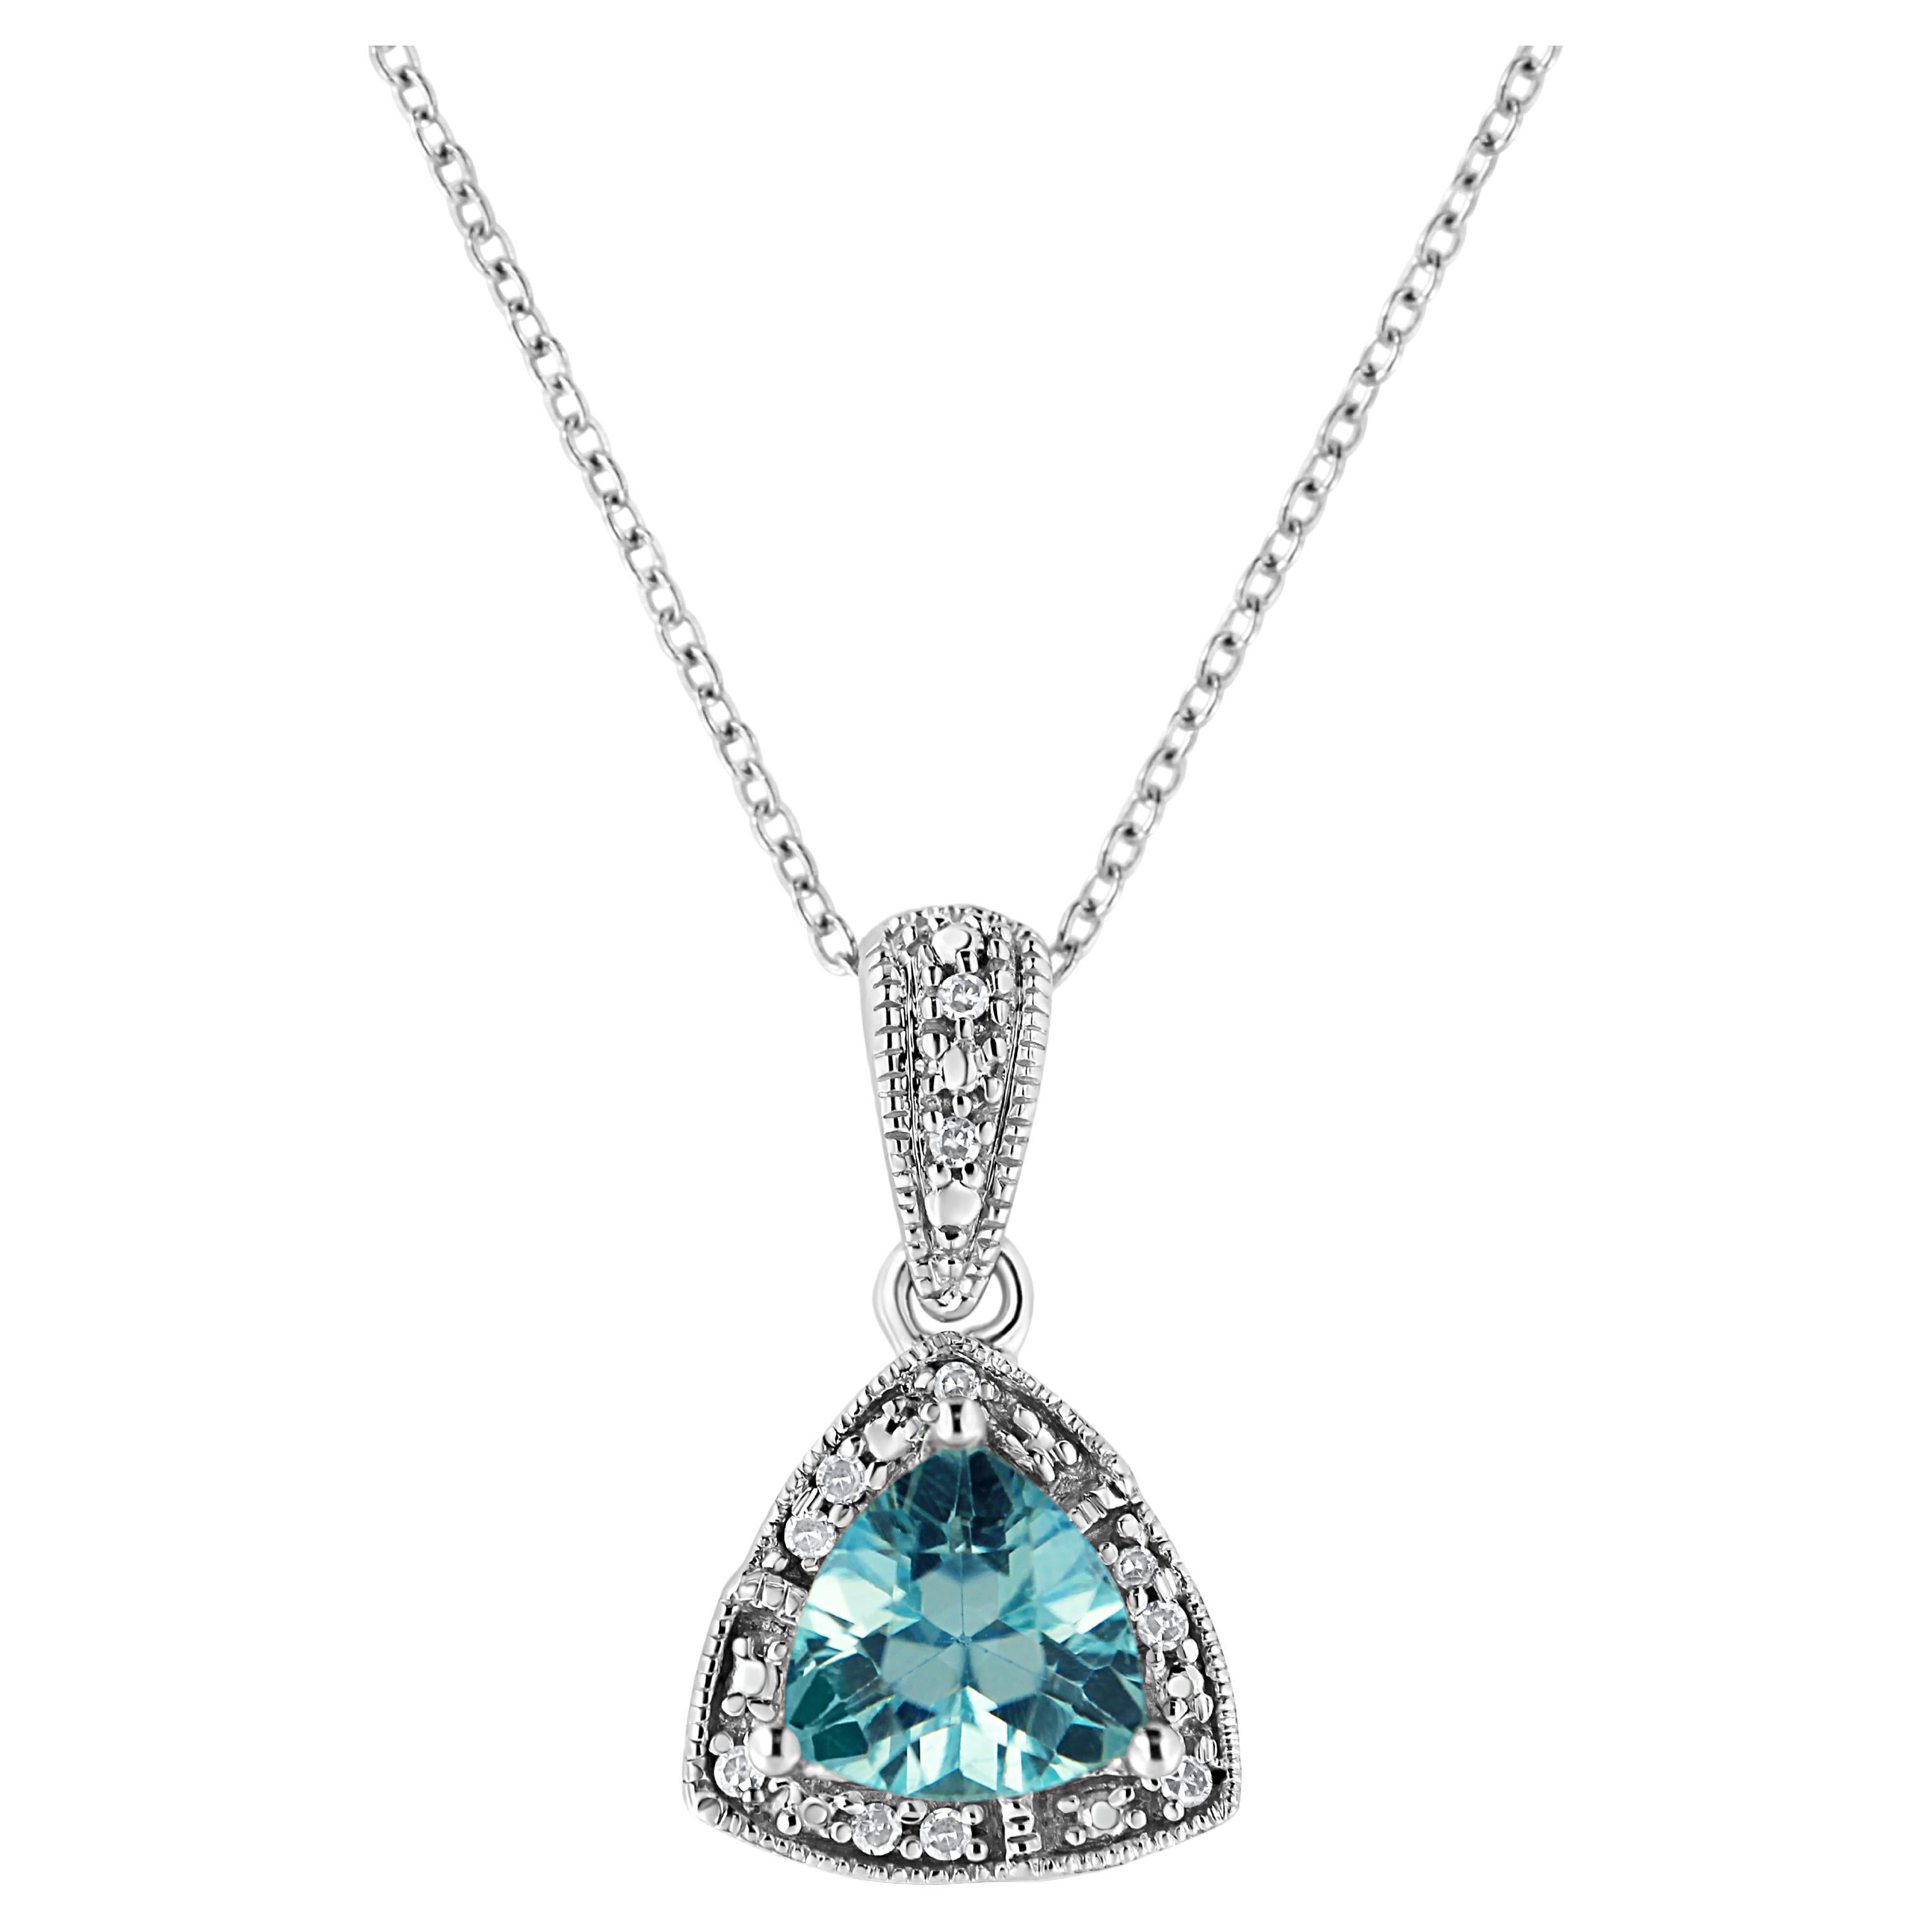 .925 Sterling Silver Blue Topaz Gemstone and Diamond Accent Pendant Necklace For Sale